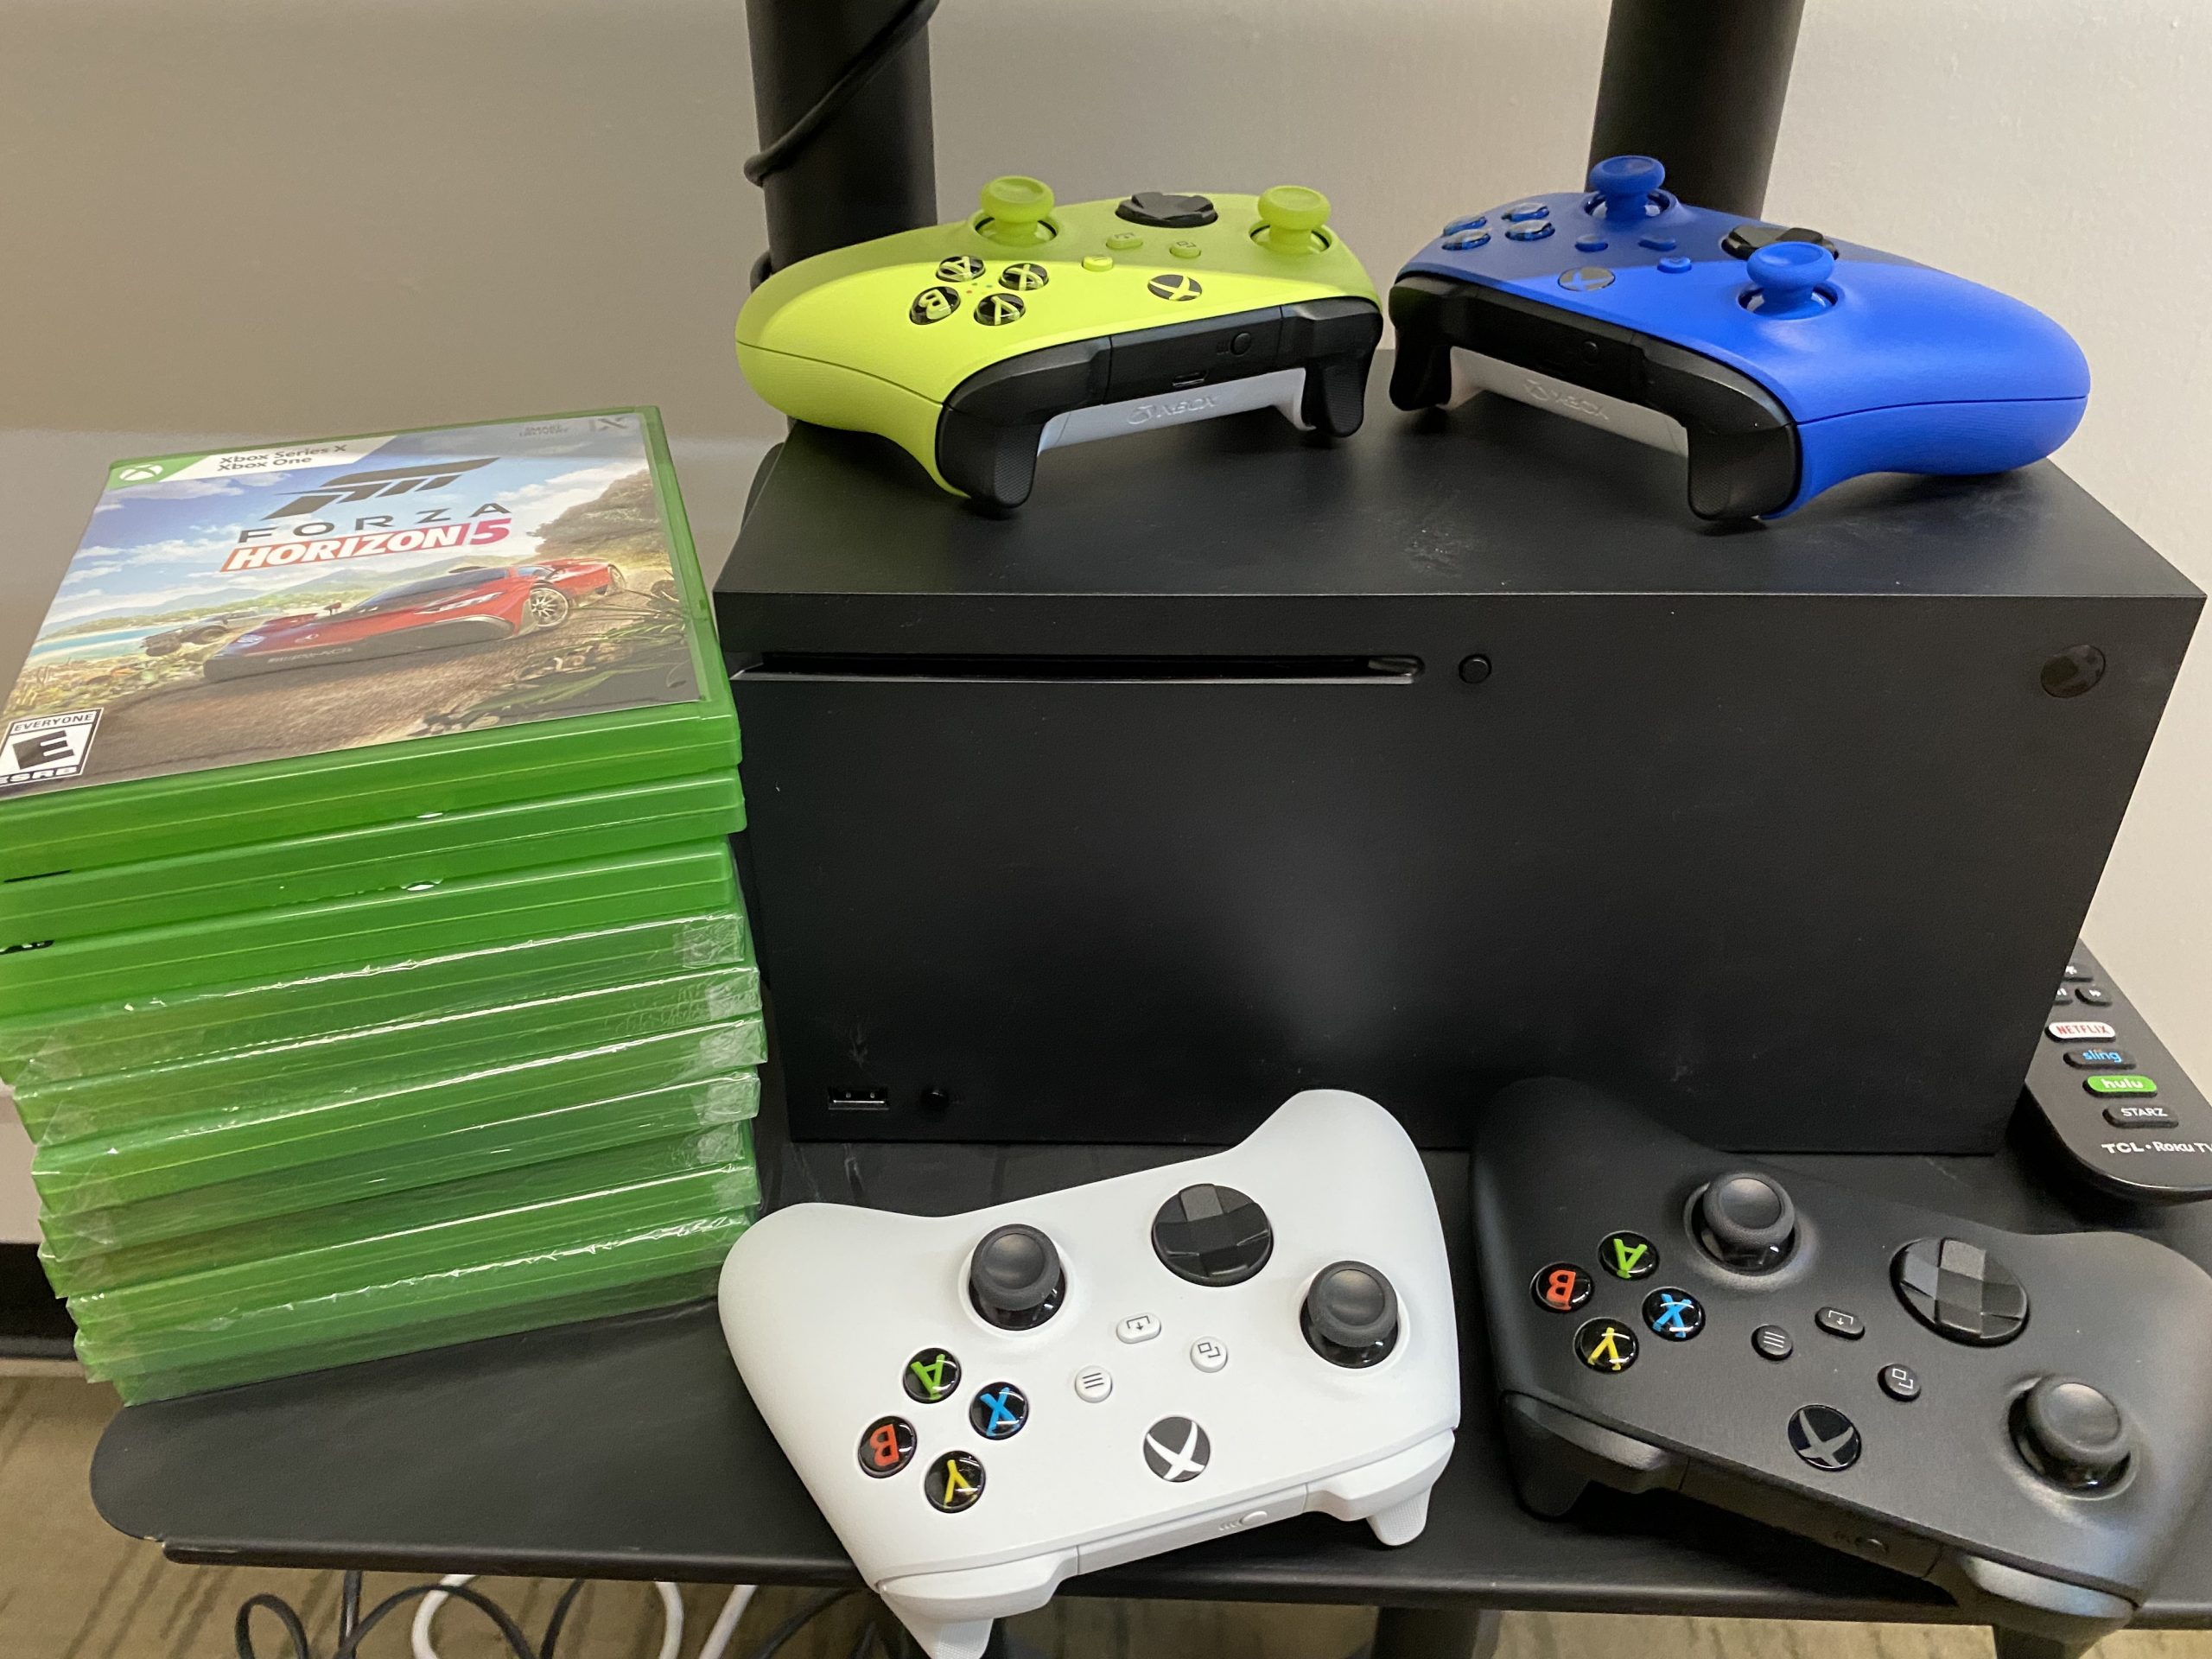 Xbox series X gaming system with black, whitem blue, and neon green controllers next to a stack of games